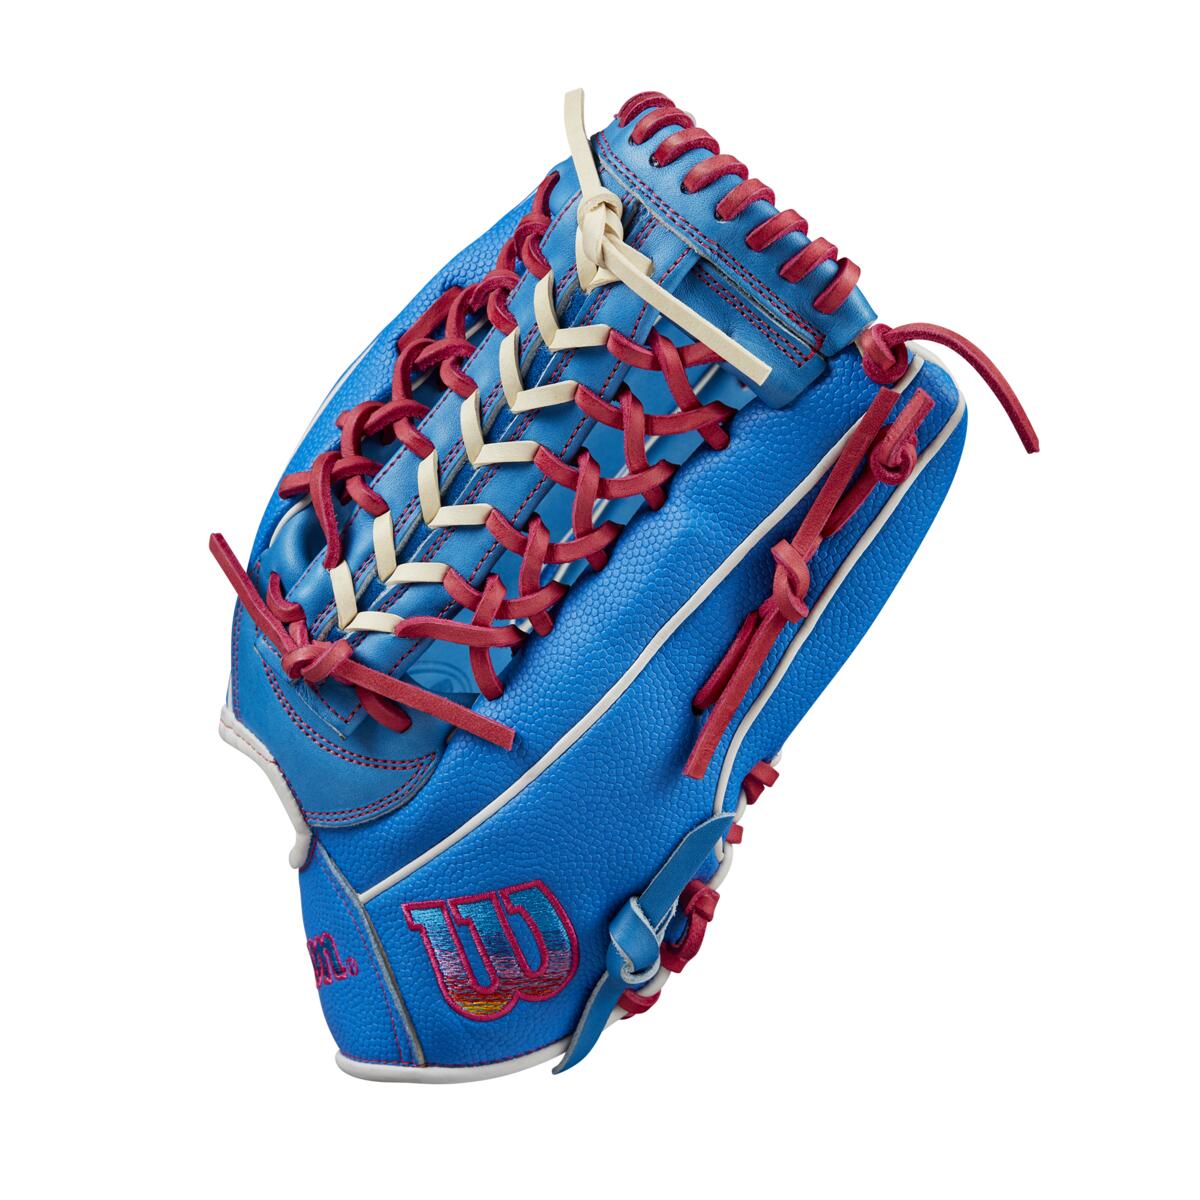 WILSON 2024 AUTISM SPEAKS A2000® PF92SS 12.25” OUTFIELD BASEBALL GLOVE: WBW1021051225